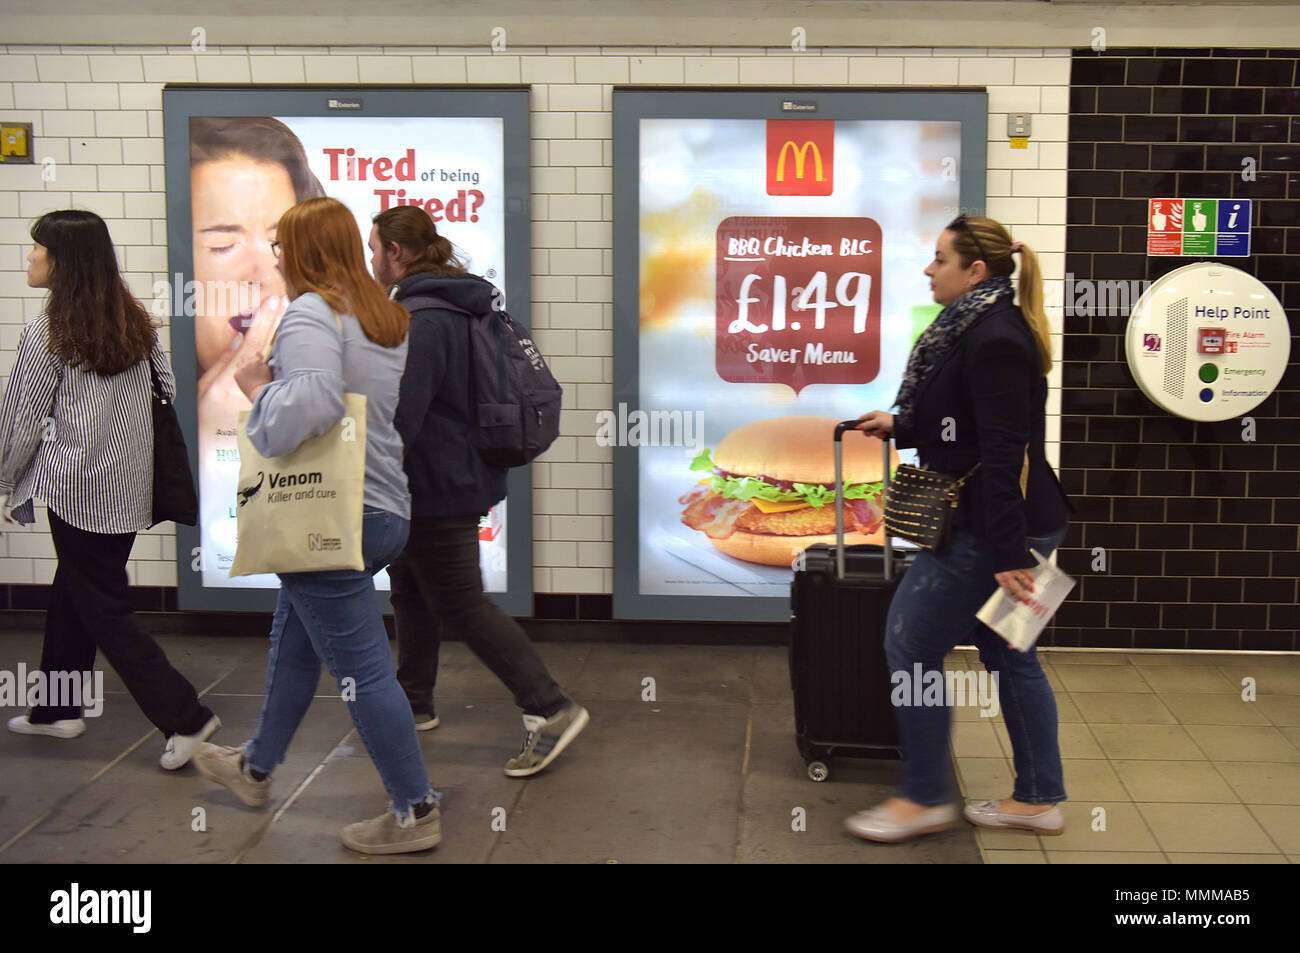 People walk past advertising hoardings promoting McDonalds BBQ Chicken burger in the Notting Hill underground station in central London.  Junk food ad Stock Photo